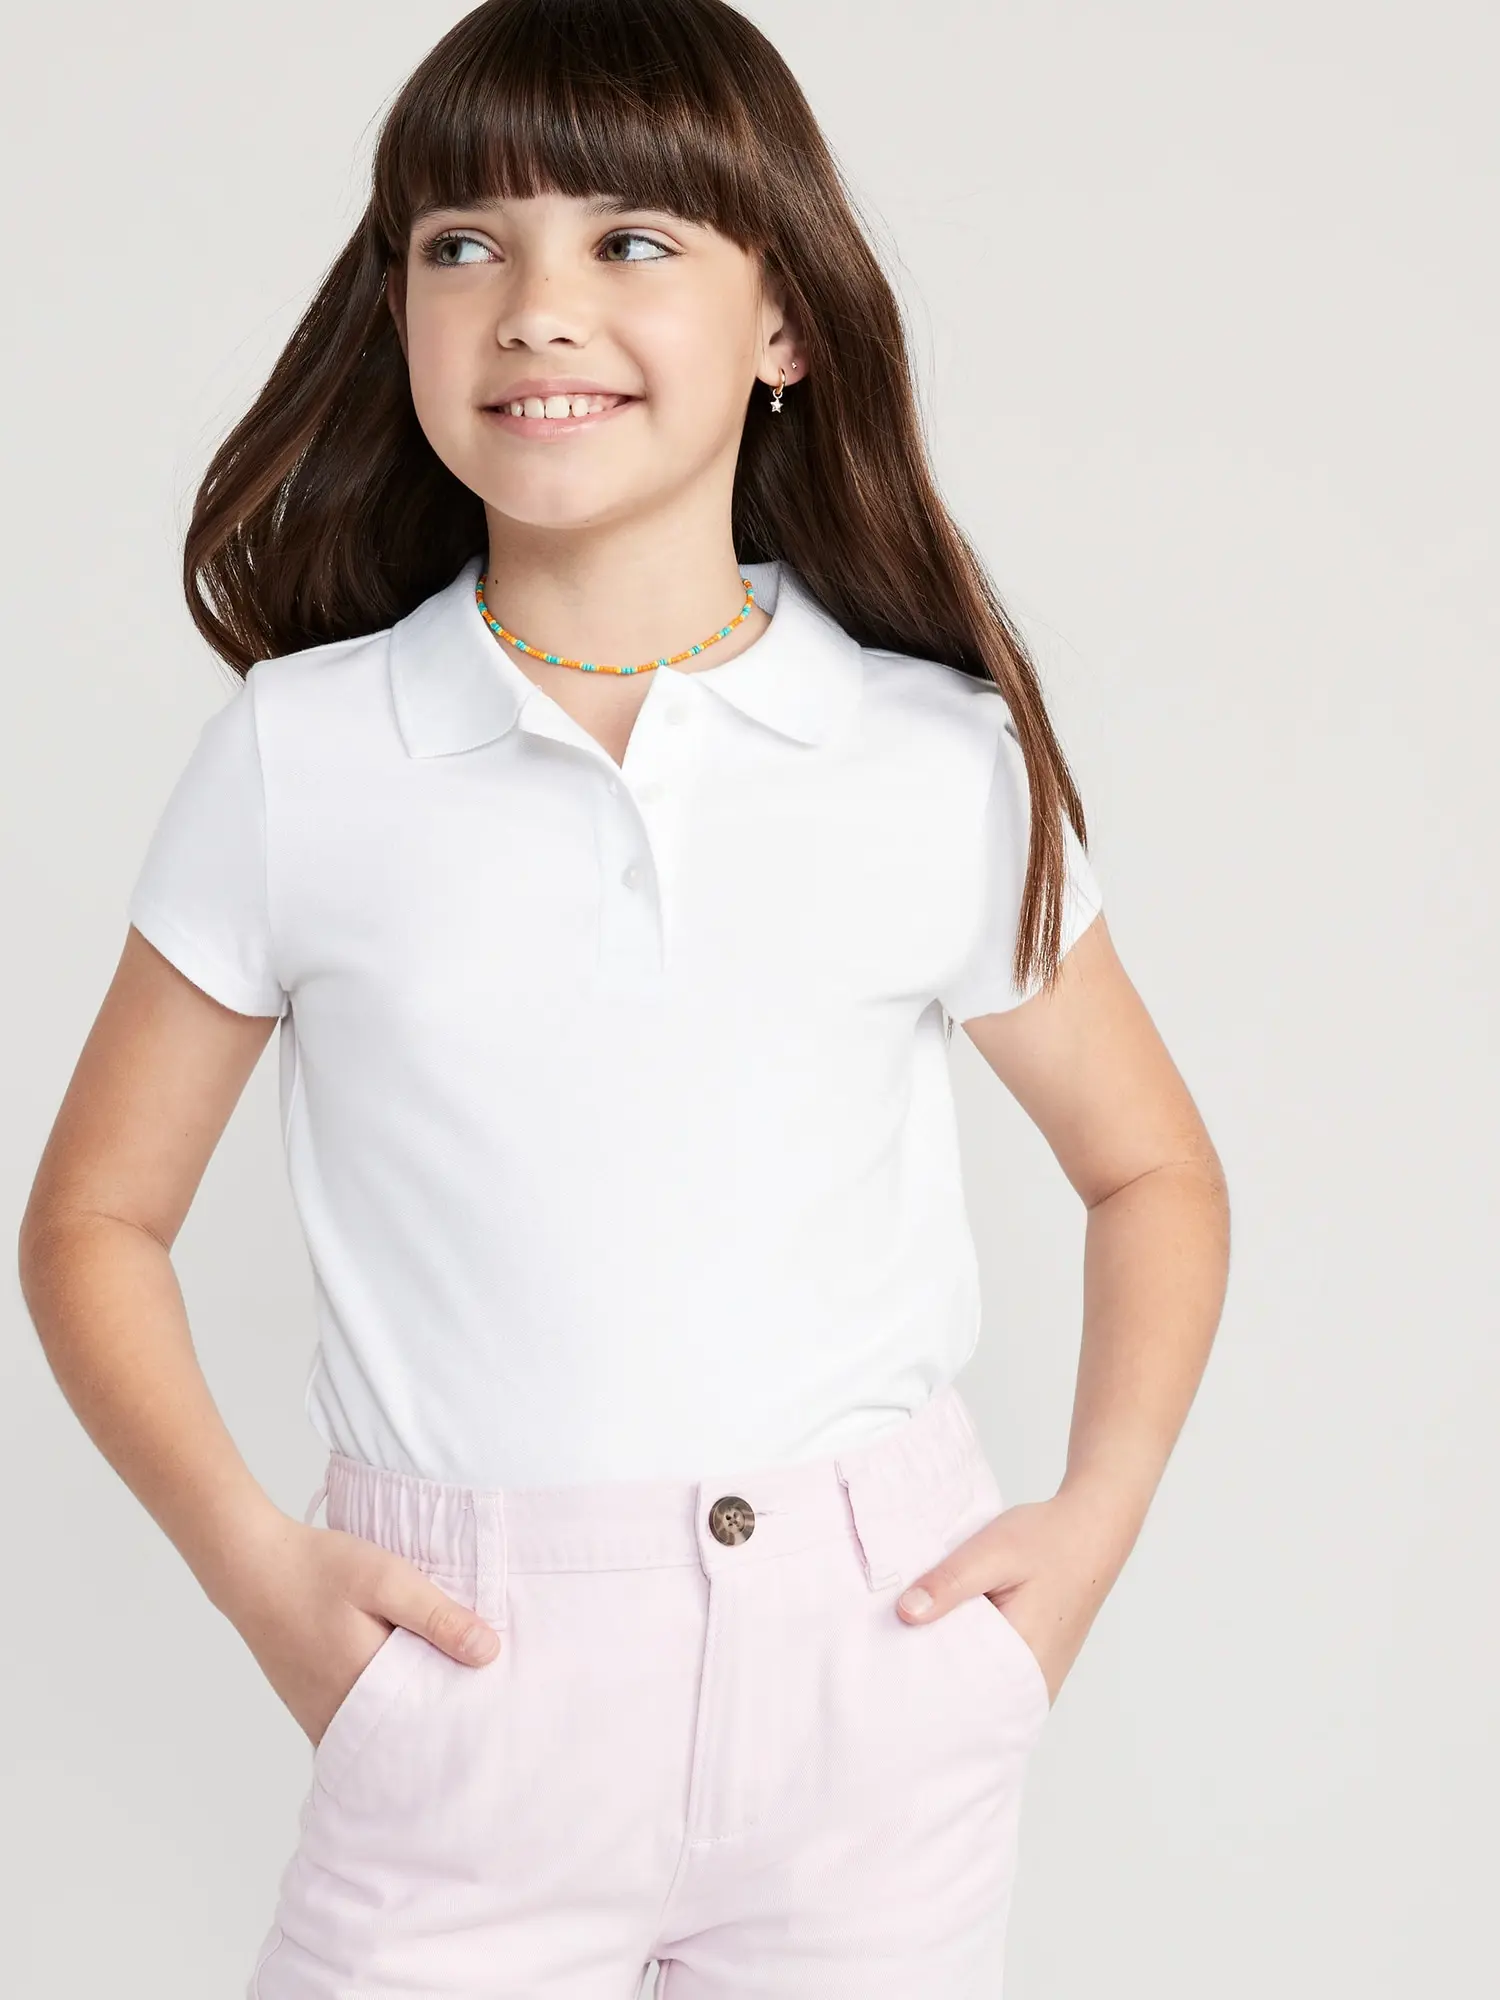 Old Navy Uniform Pique Polo Shirt for Girls white. 1